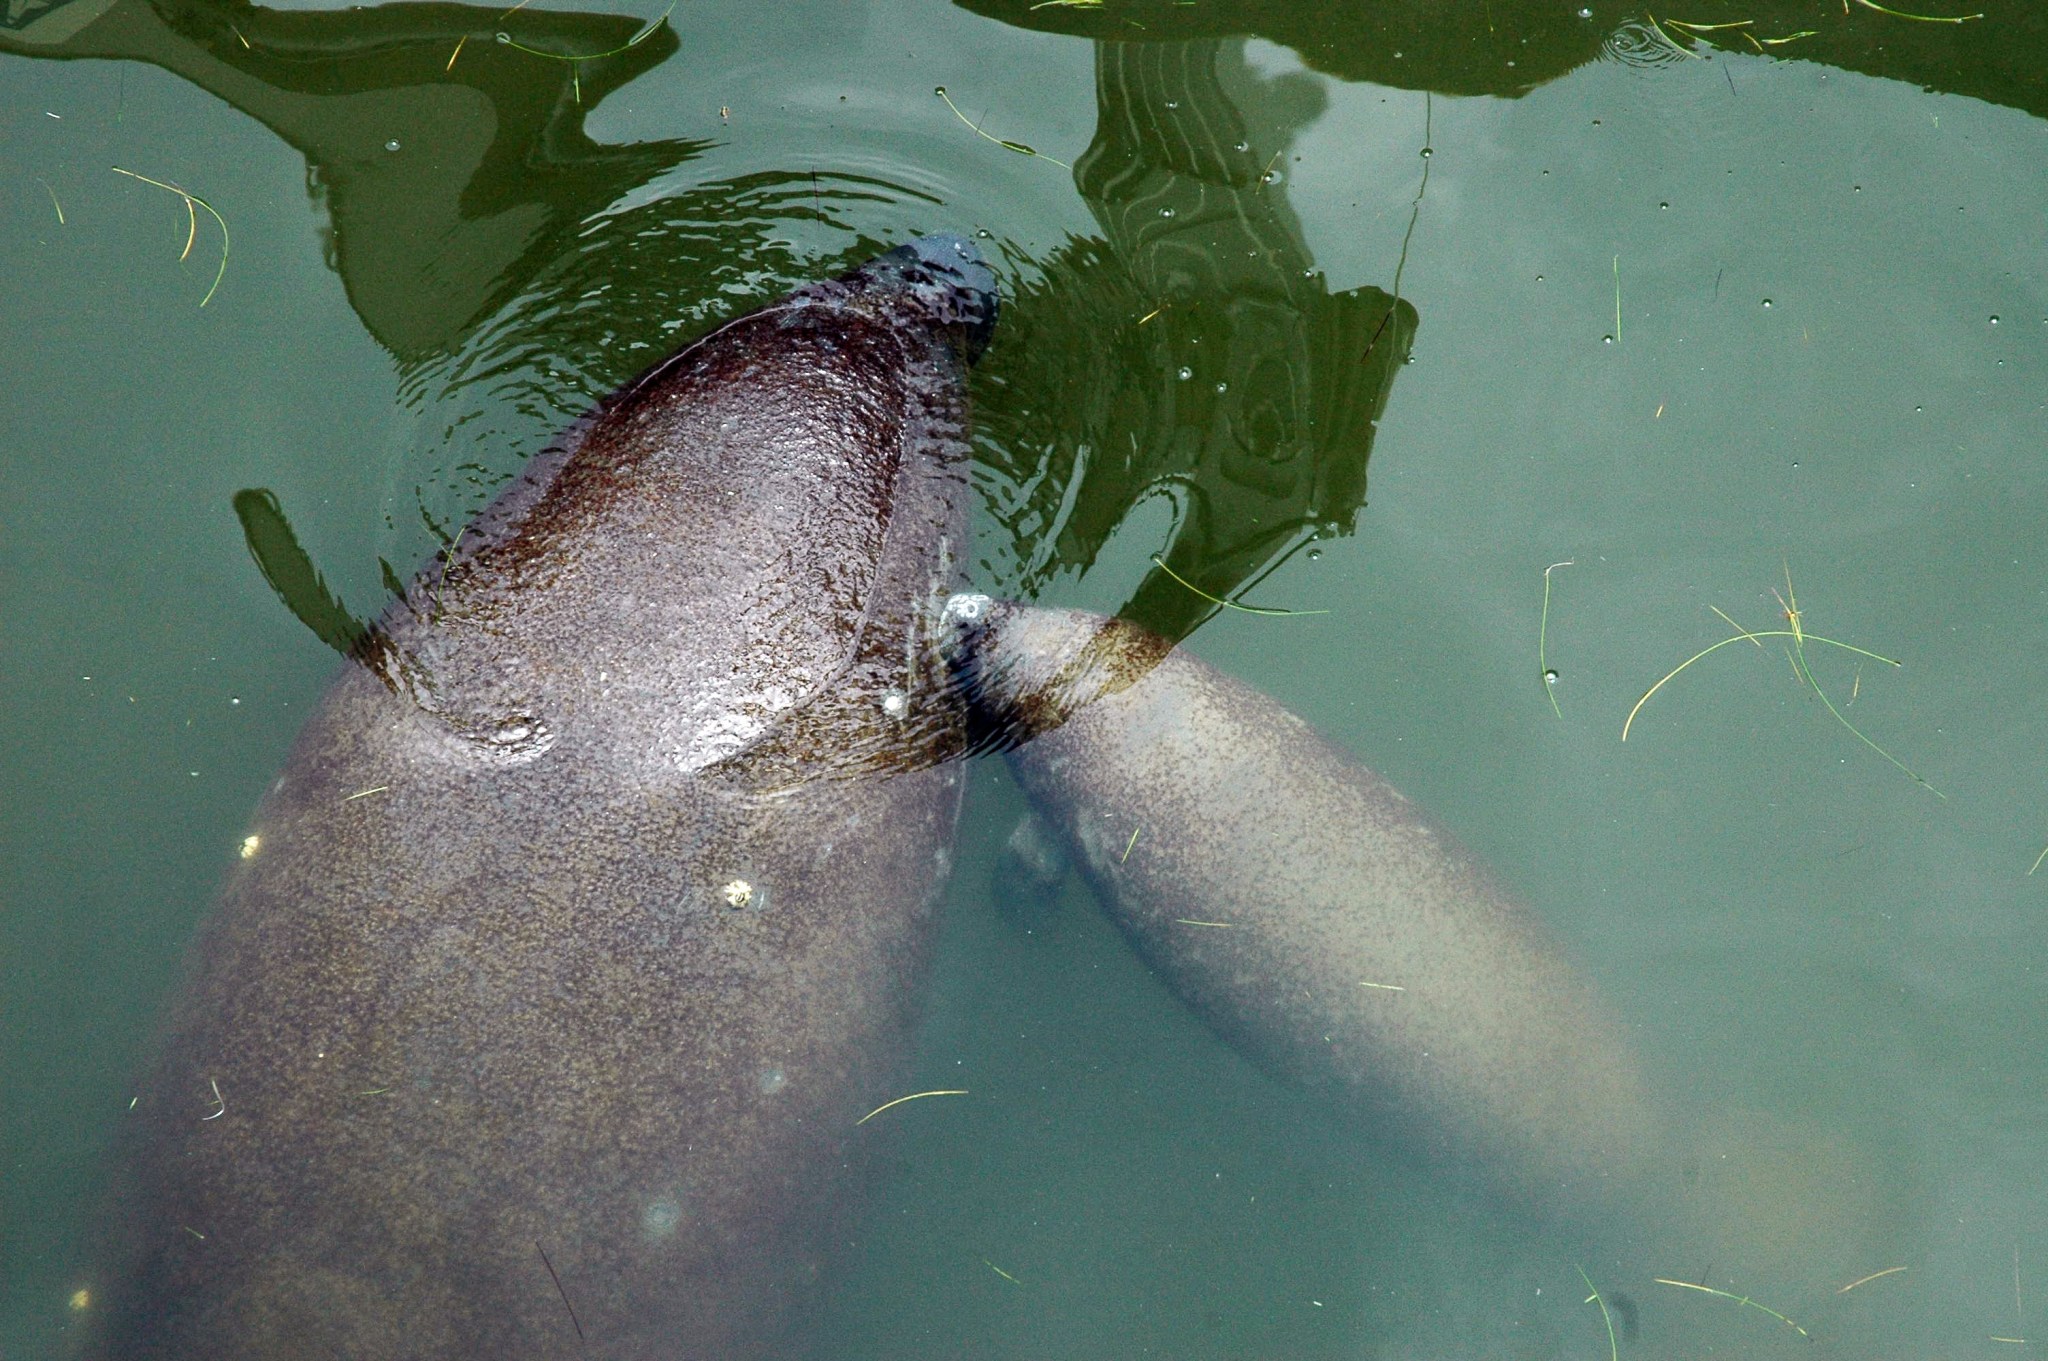 Two manatees frolic in the Banana Creek, adjacent to NASA’s Kennedy Space Center. The Florida manatee feeds on more than 60 varieties of grasses and plants. Kennedy shares a boundary with the Merritt Island National Wildlife Refuge.